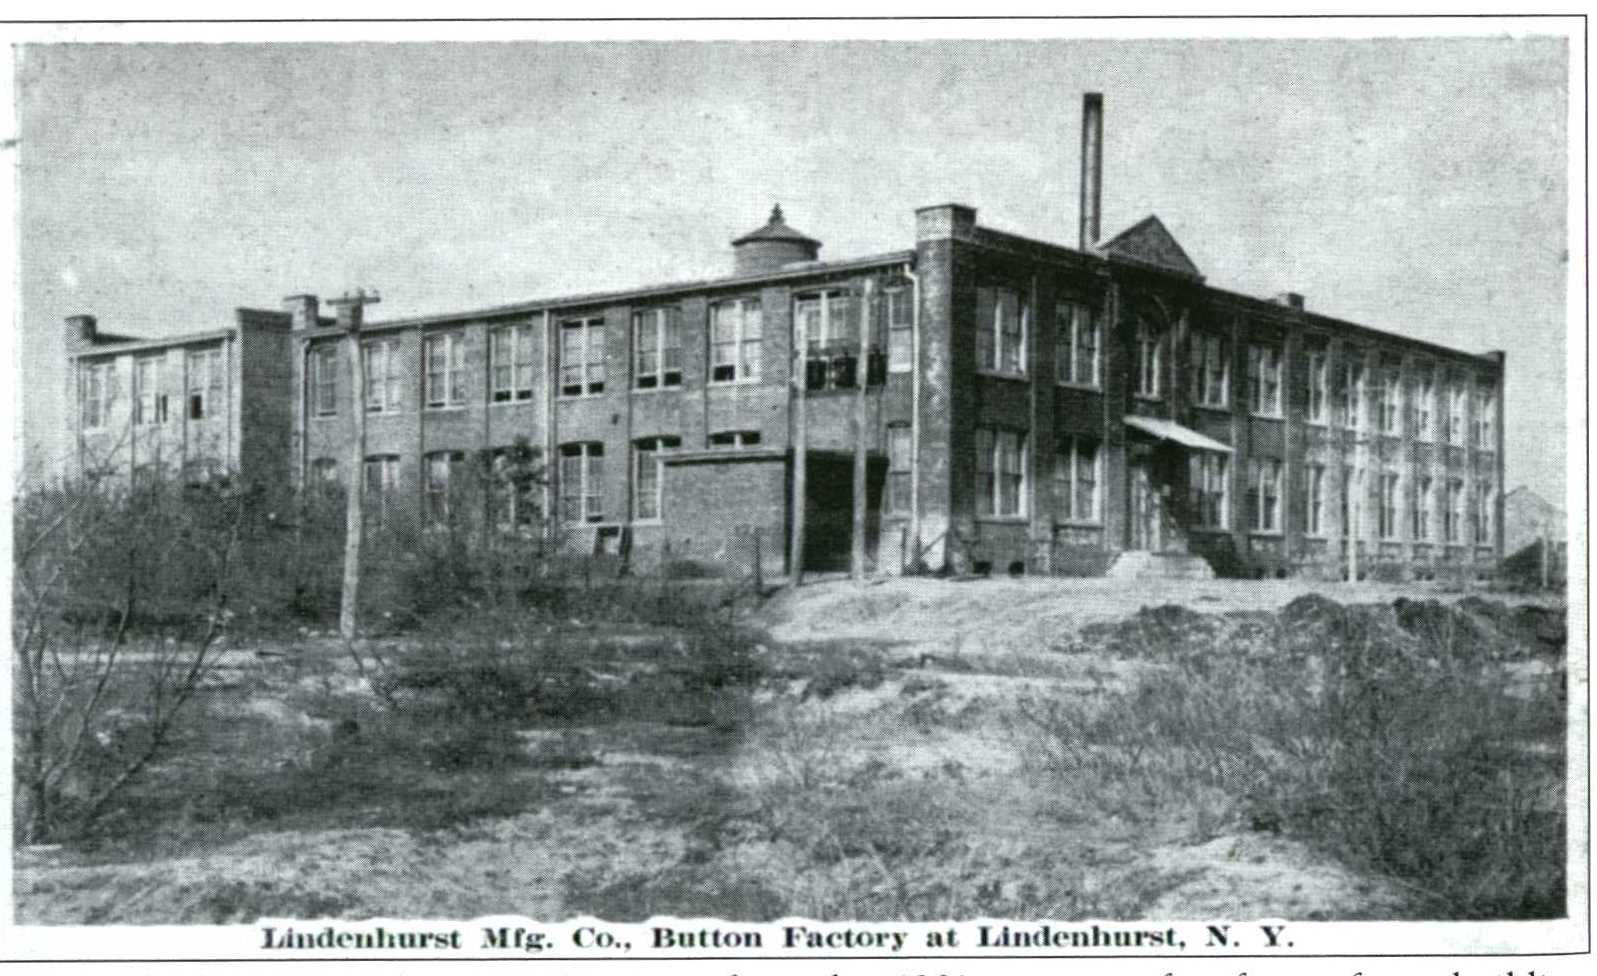 Button Factory (Lindenhurst Manufacturing Company)